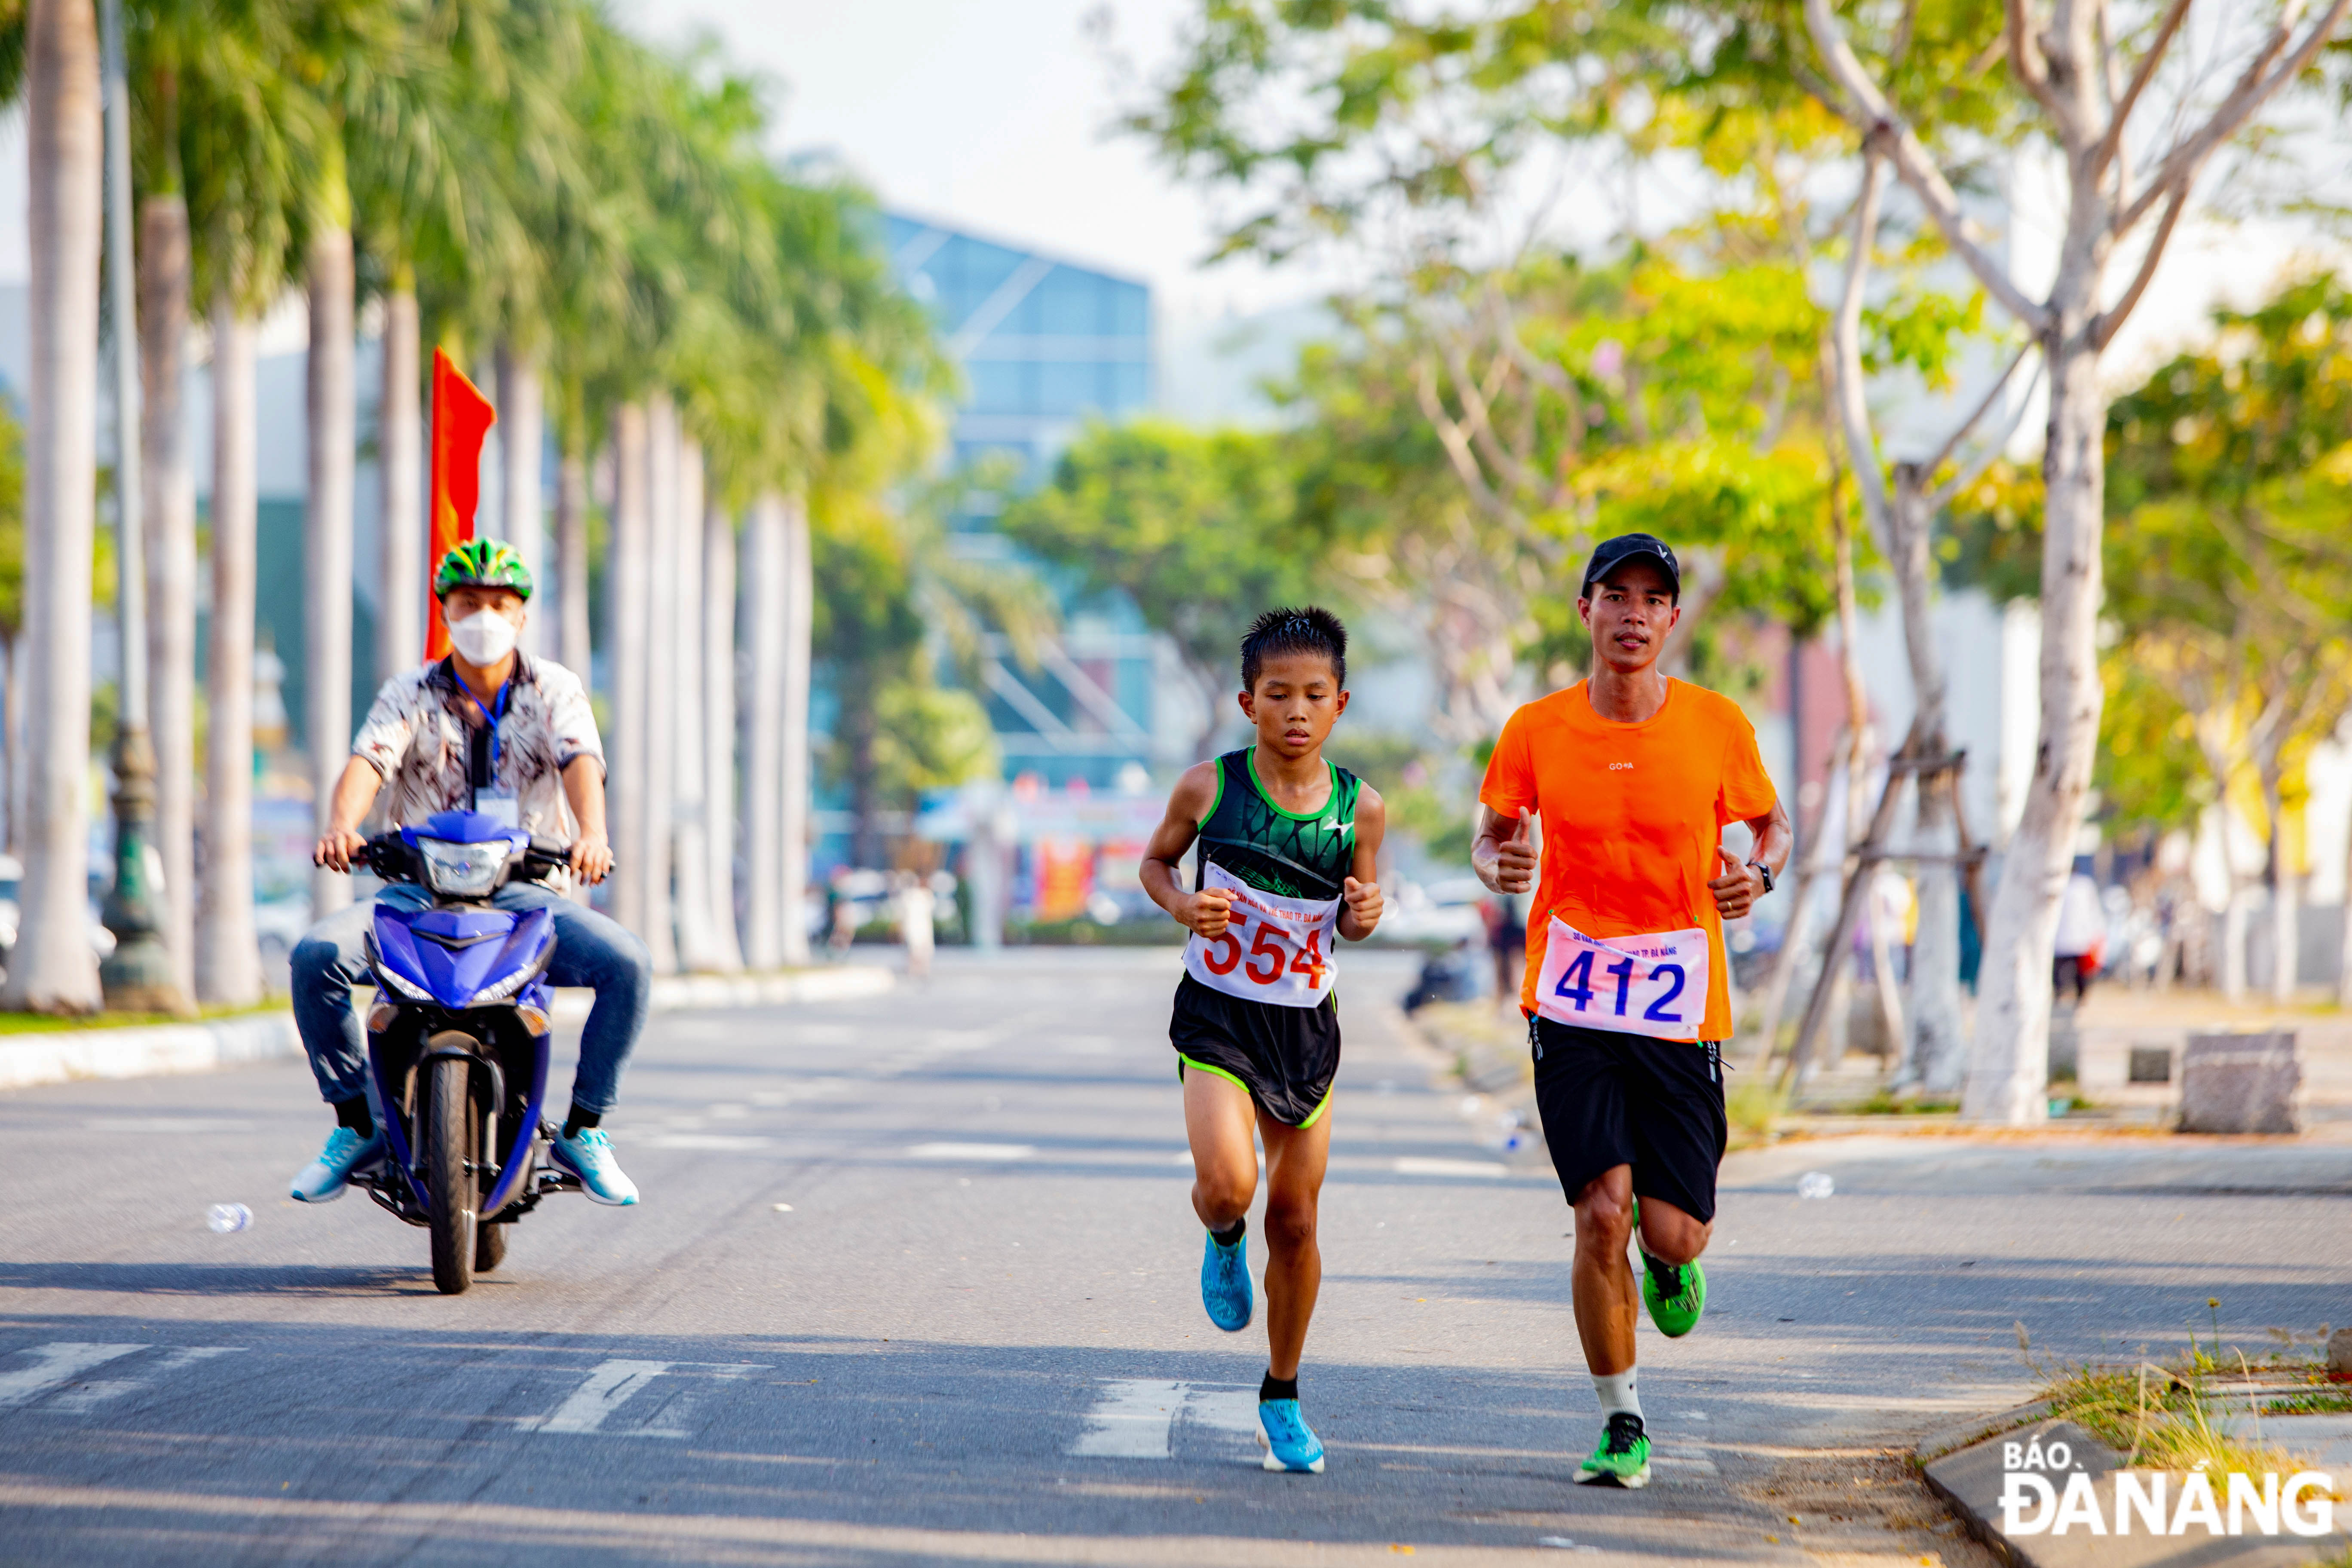 Athletes competing in individual, team and group events with distances of 1.5km, 2km, 3km, 4km, 5km and 7km.